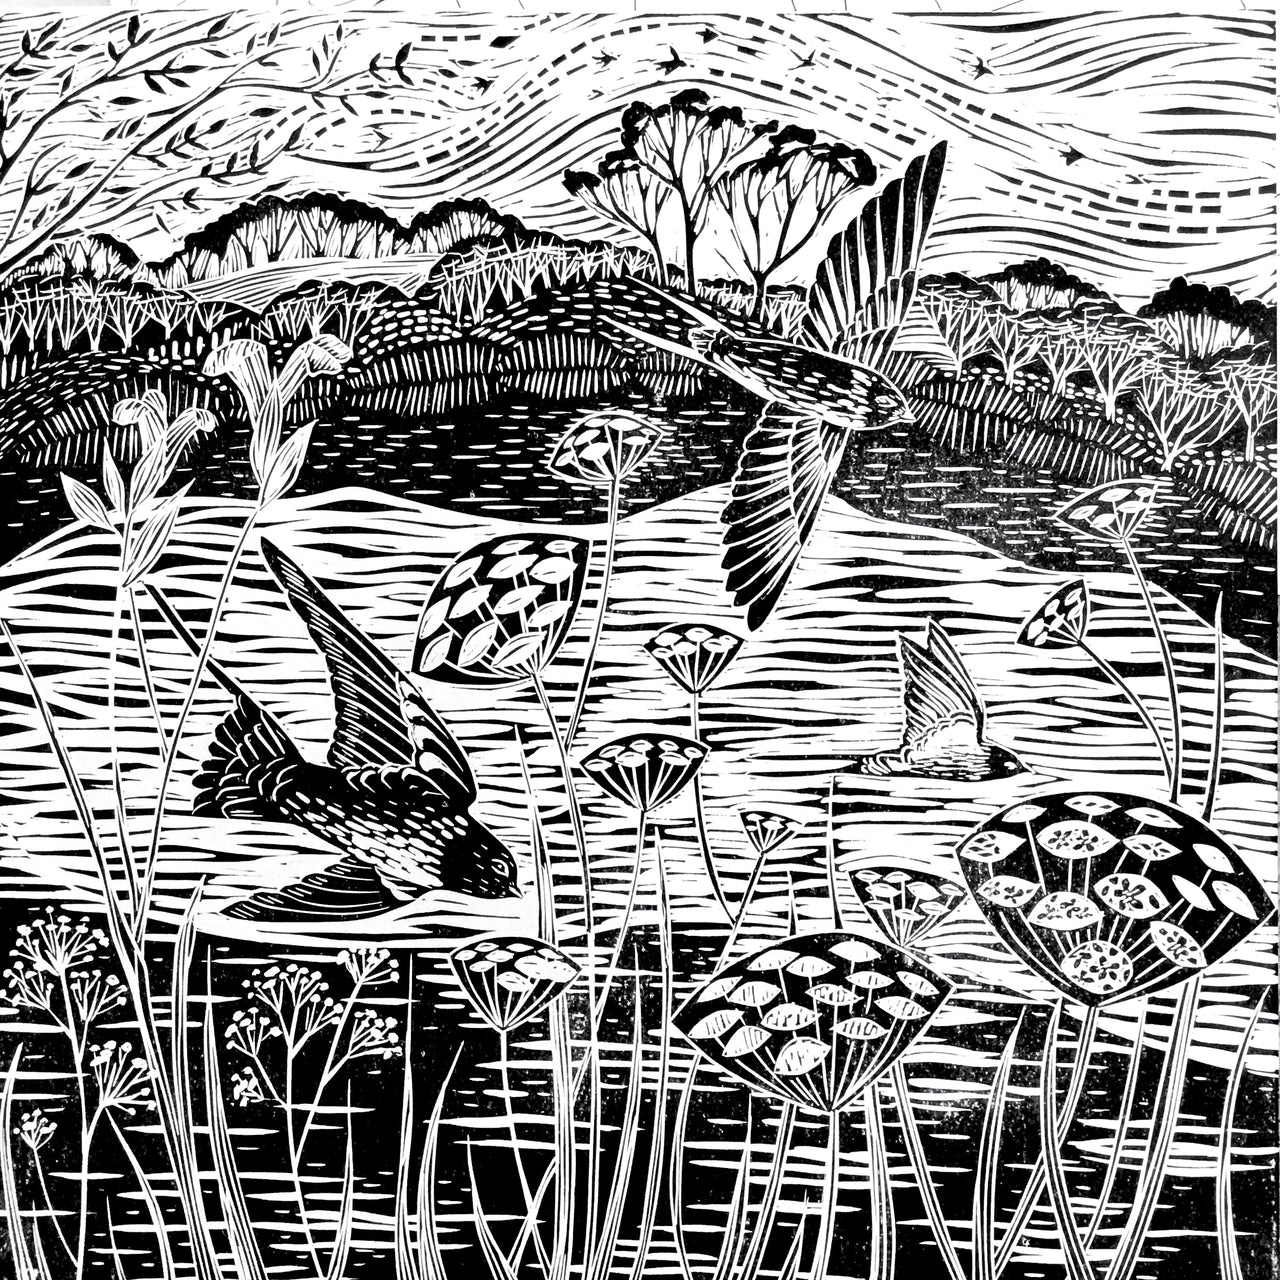 Swallows By The lake monochrome limited edition lino print by Claire Armitage